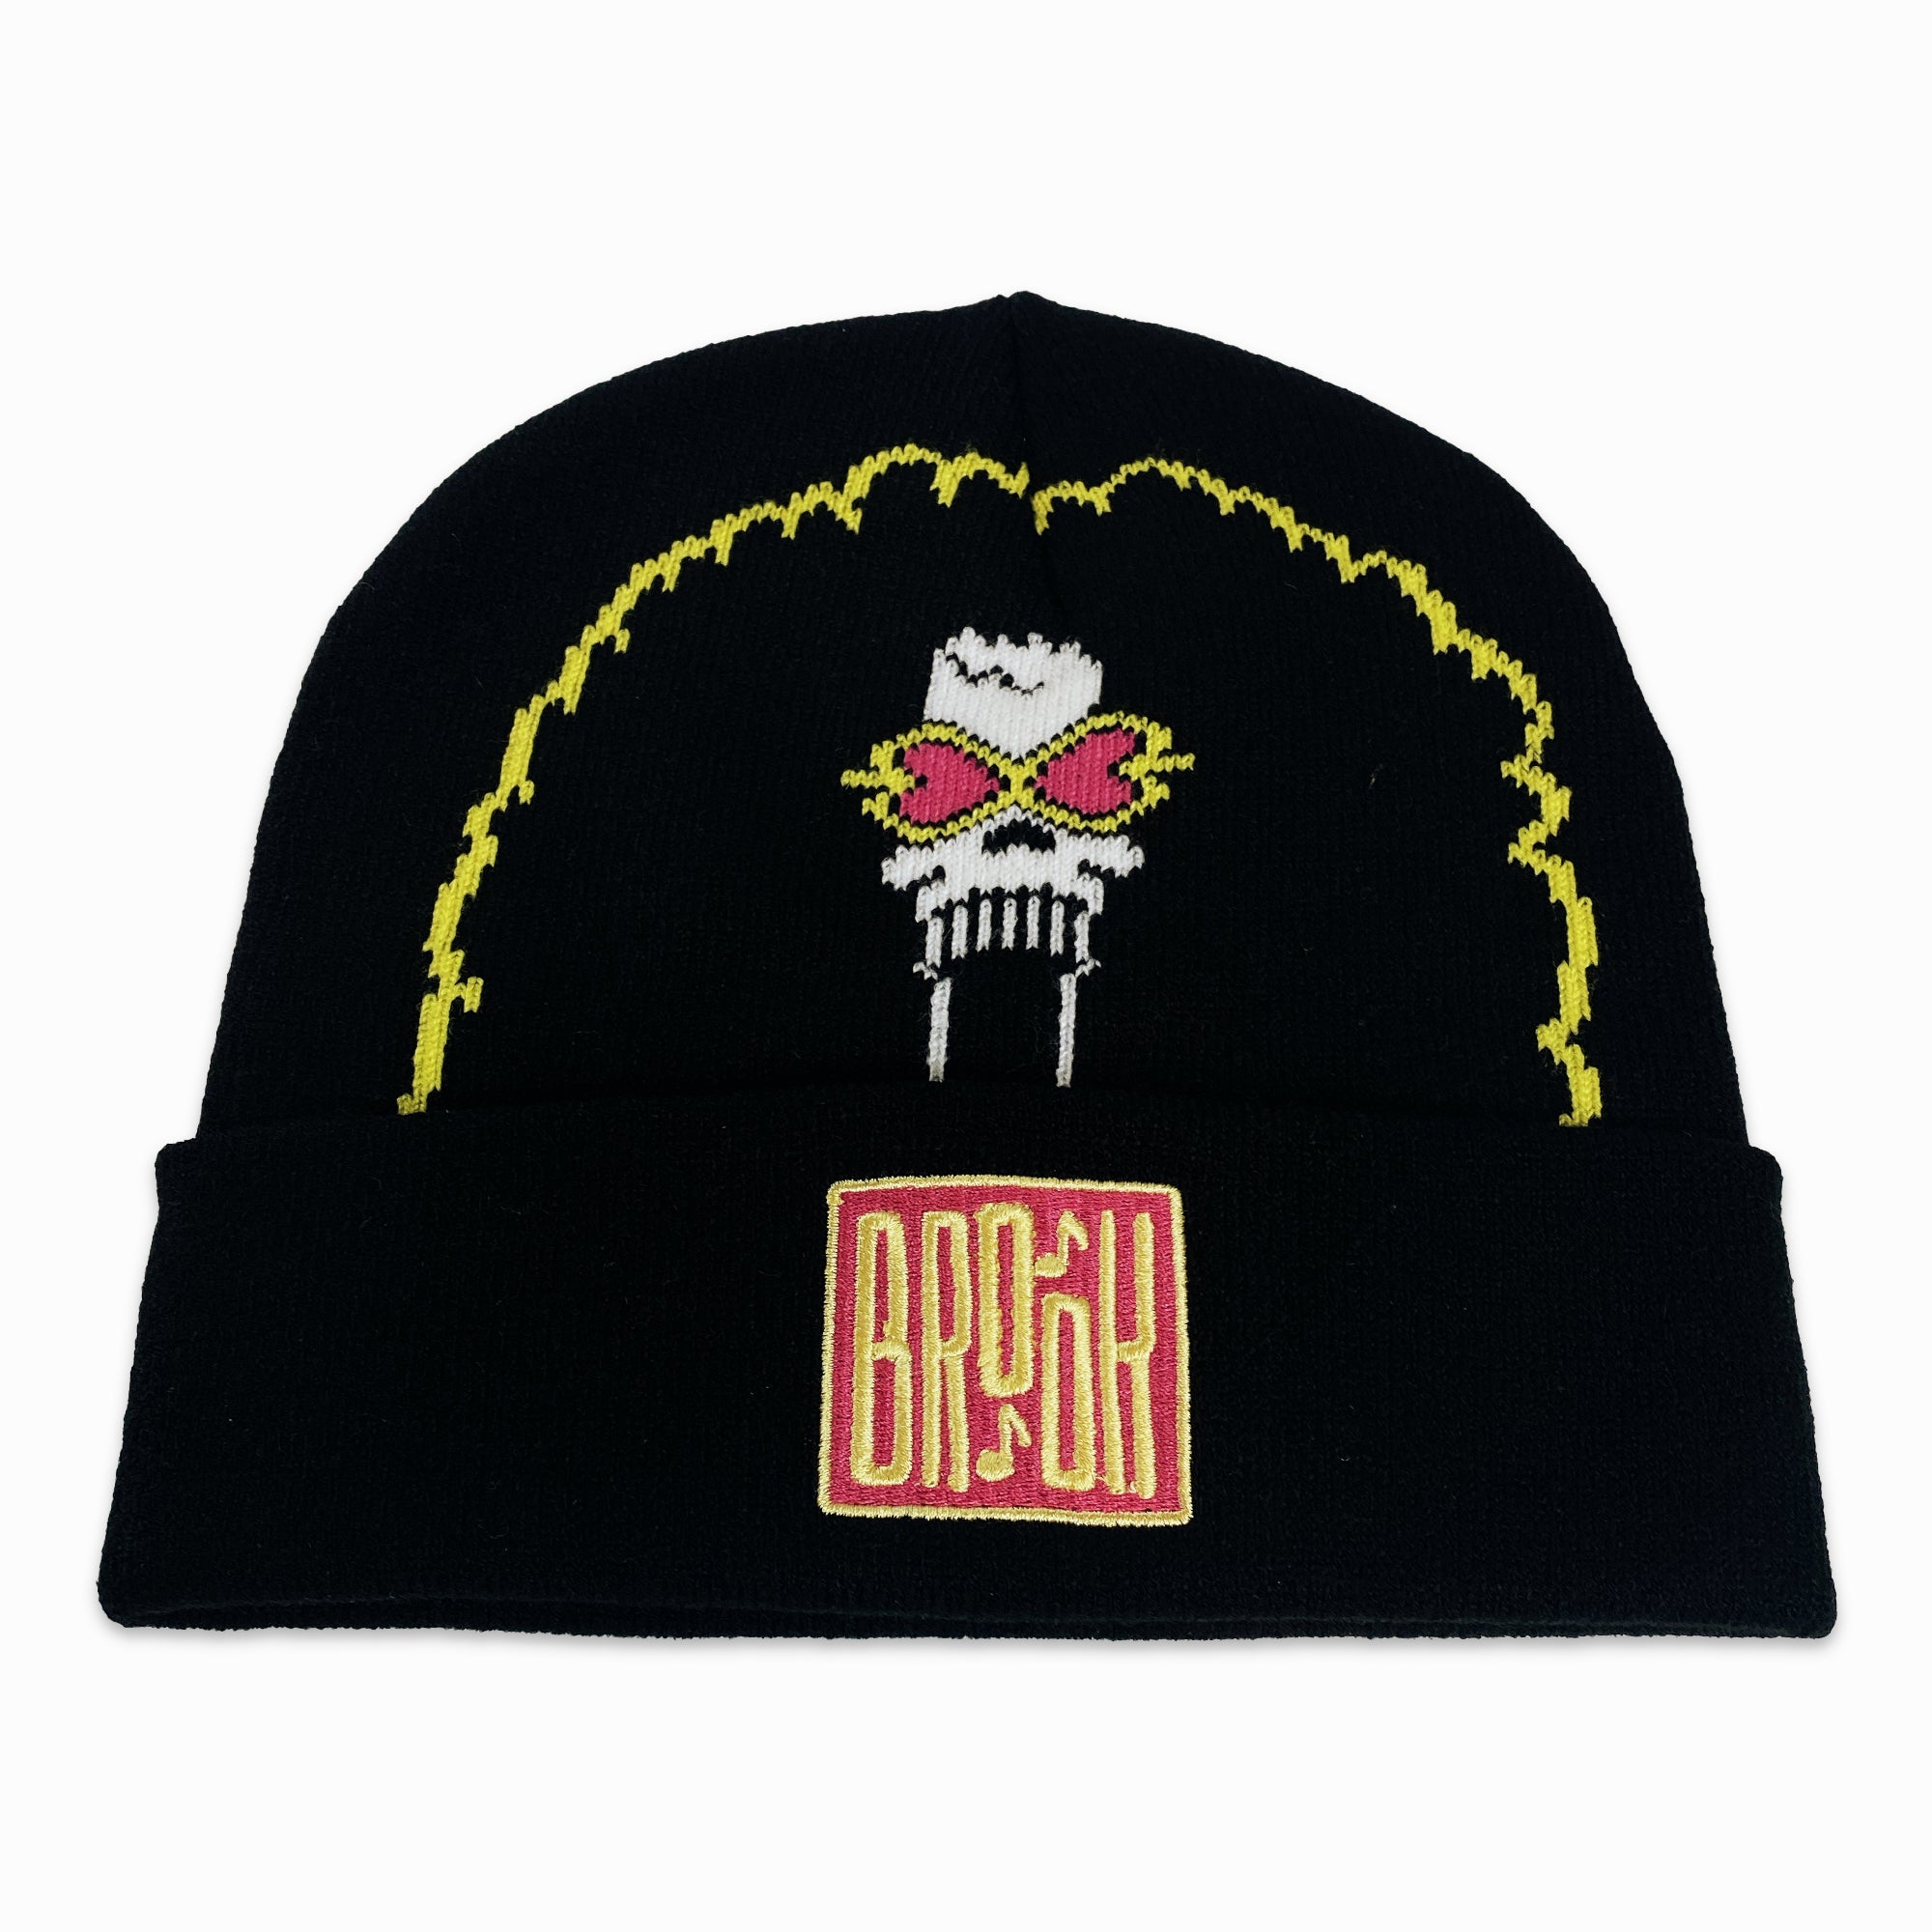 One Piece - Brook Beanie image count 0